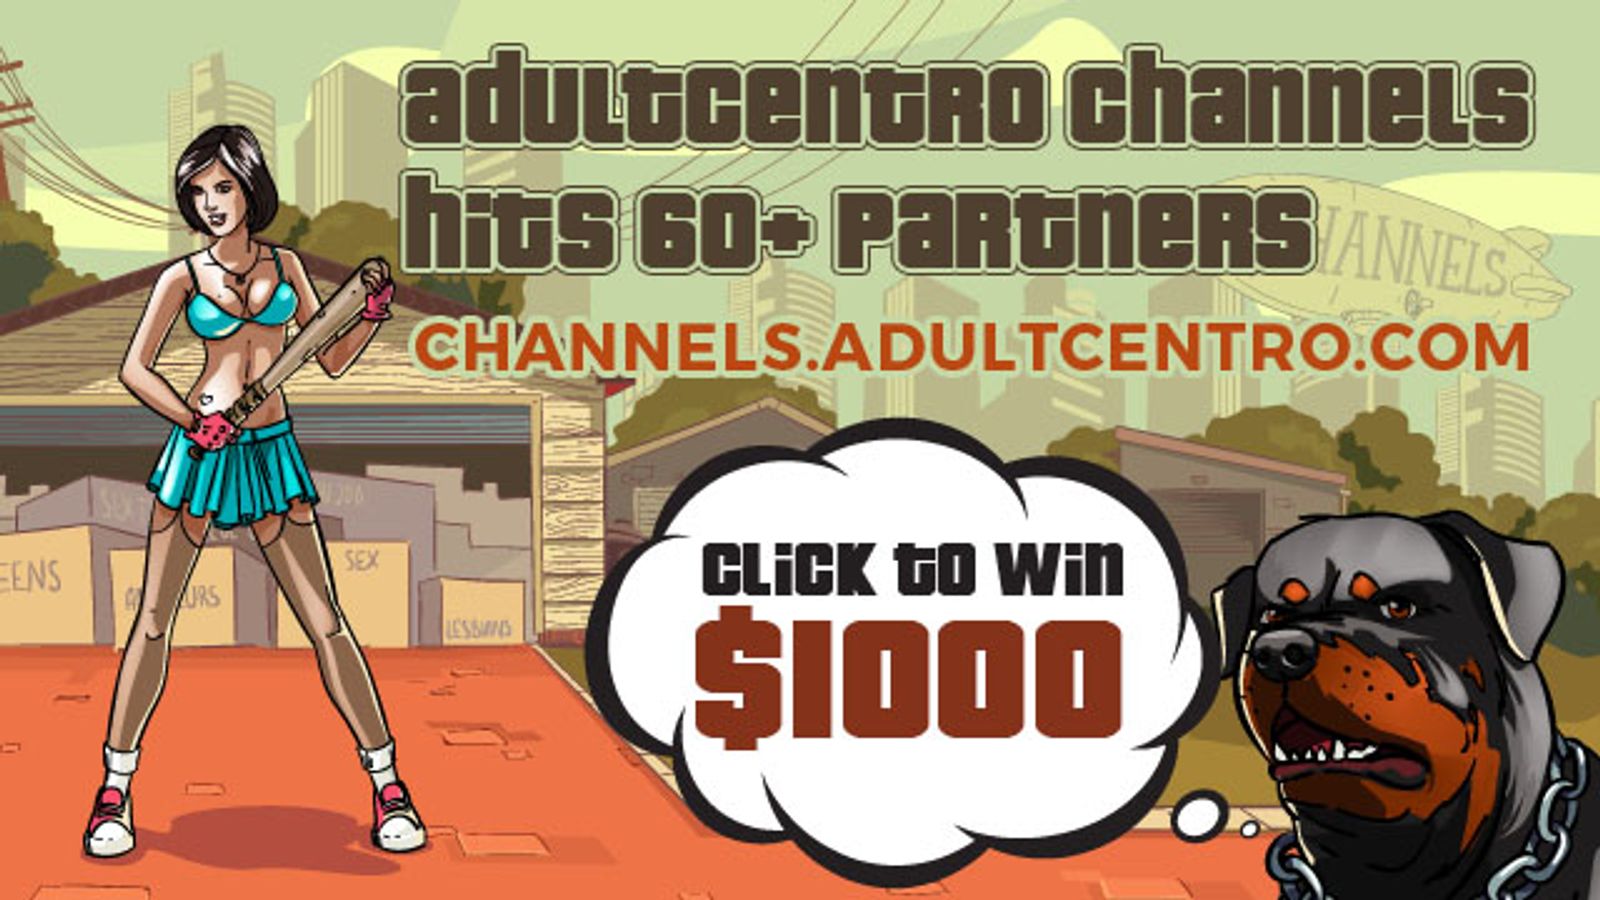 AdultCentro Launches Contest to Mark Milestone Of 60-Plus Premium Channel Partners